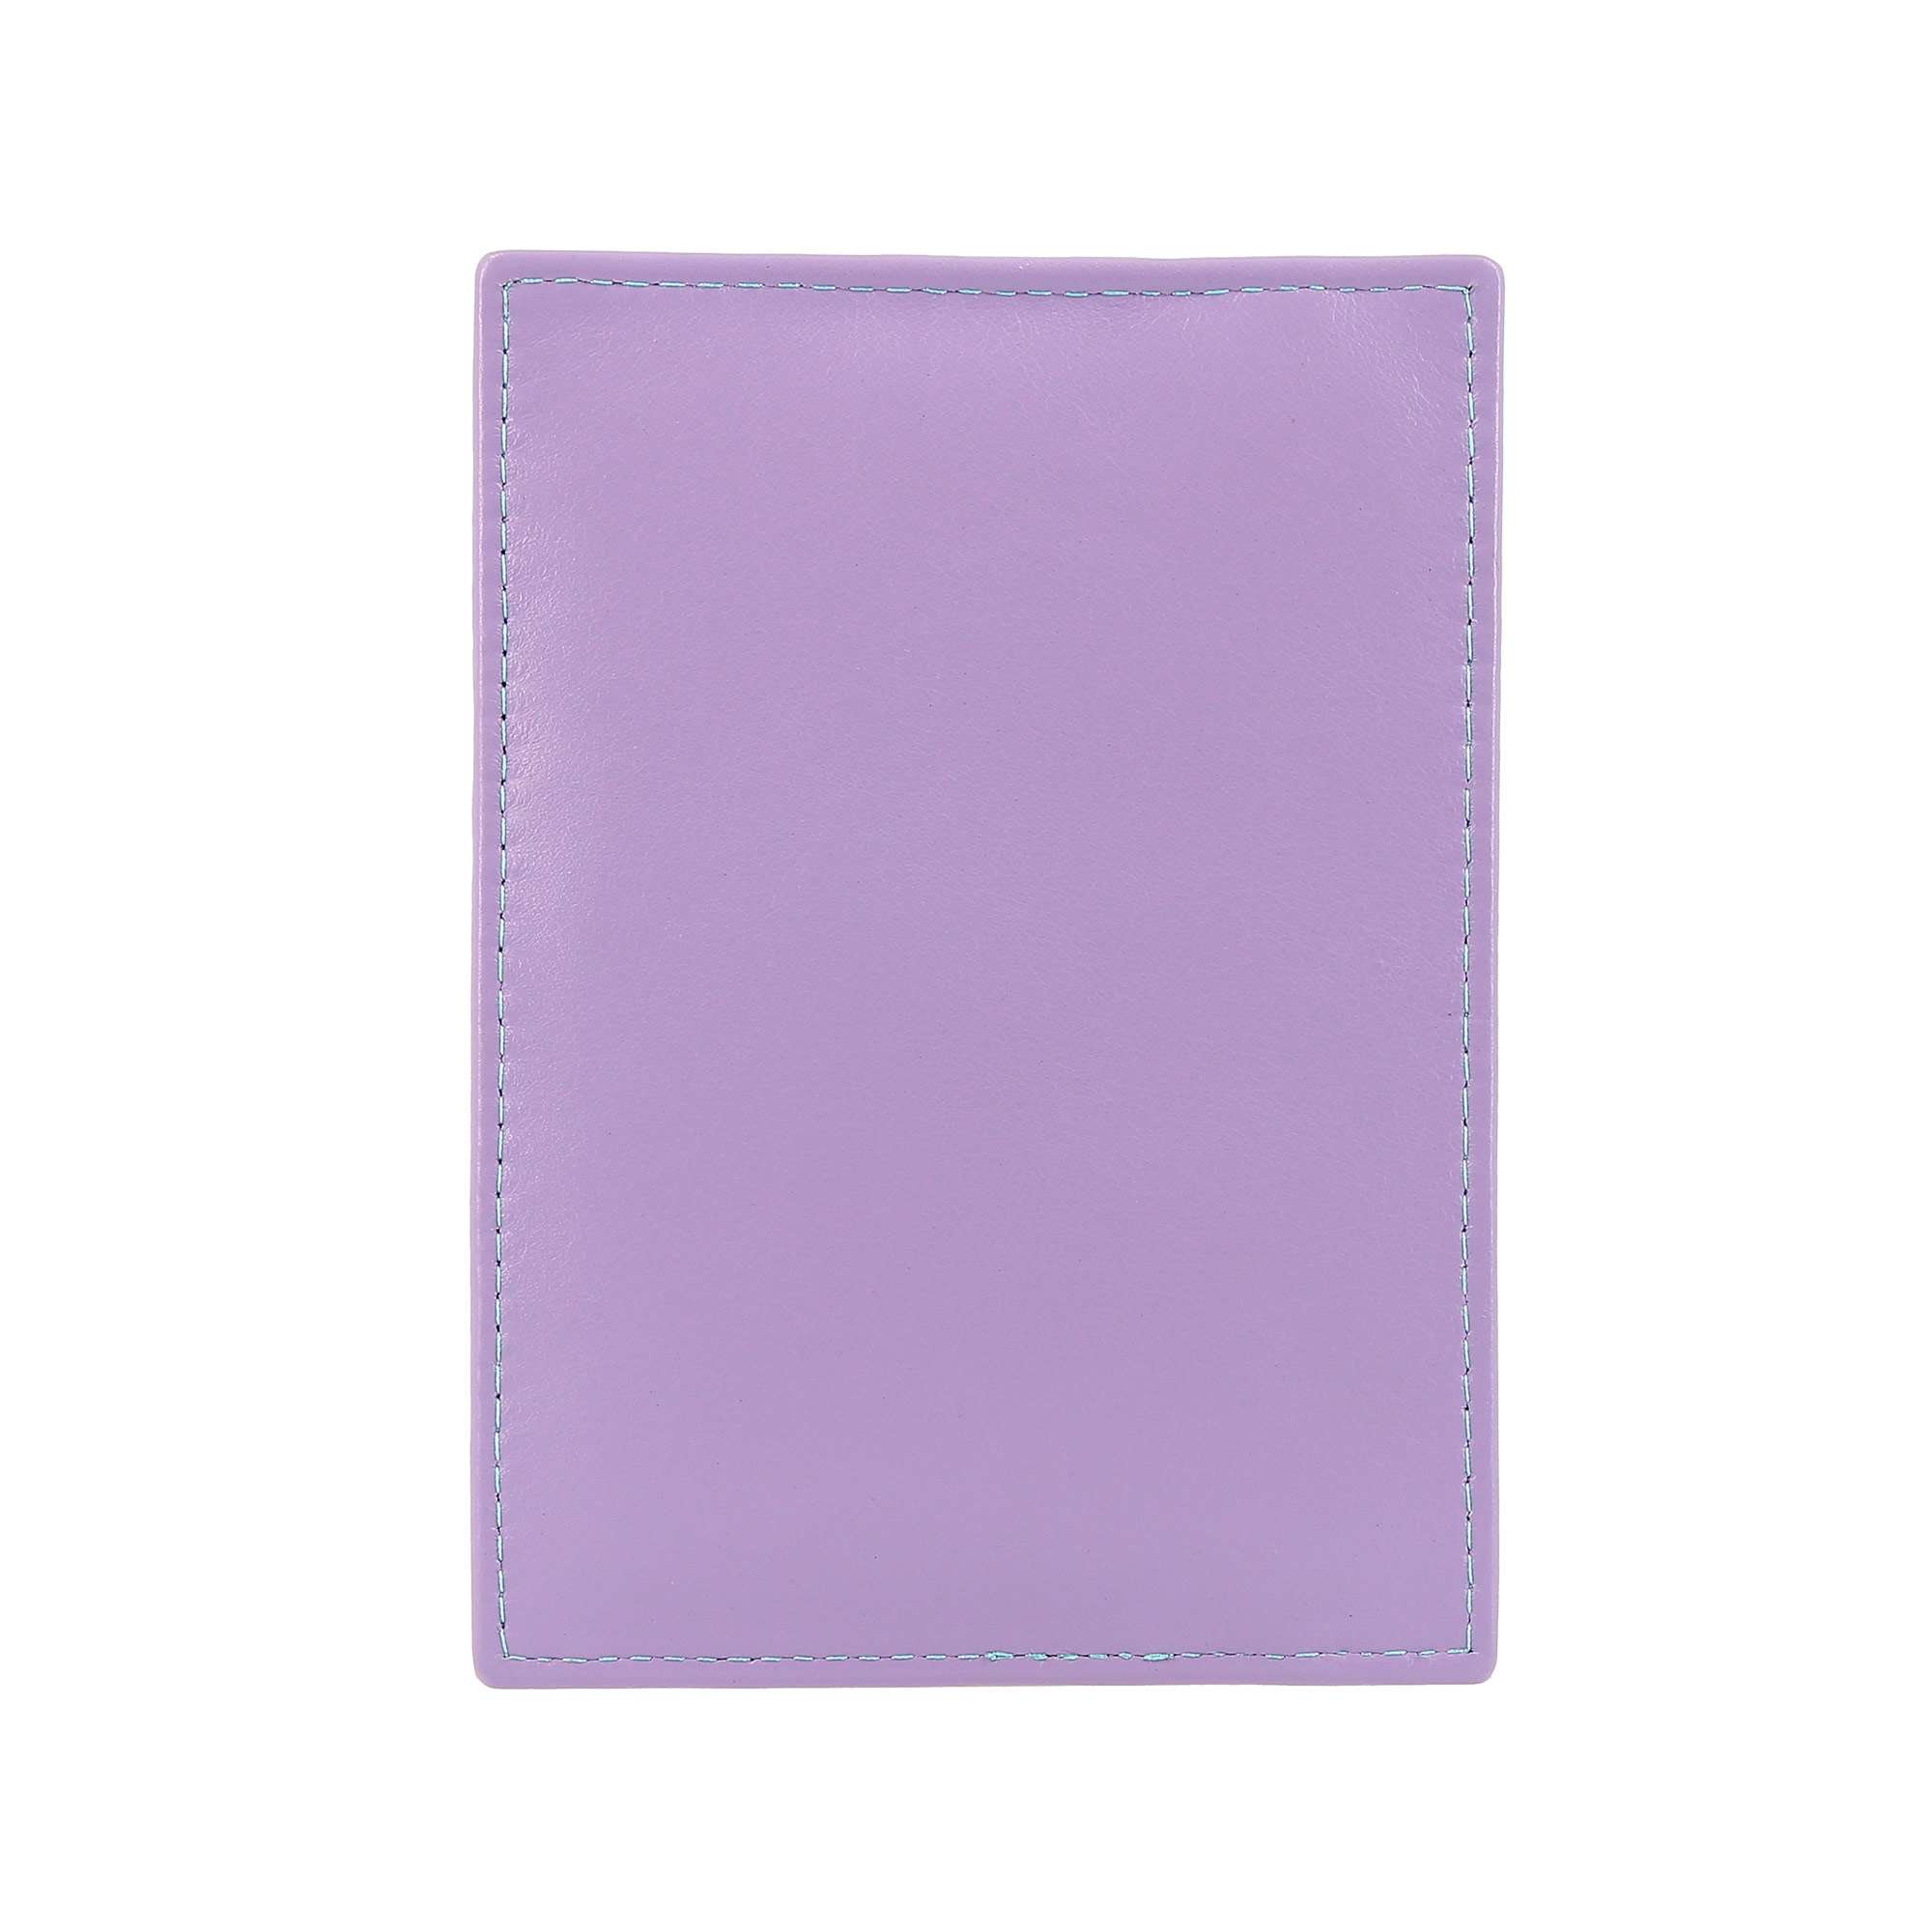 Portefeuille - Collection Colorful - Timor - Mauve - unisexe